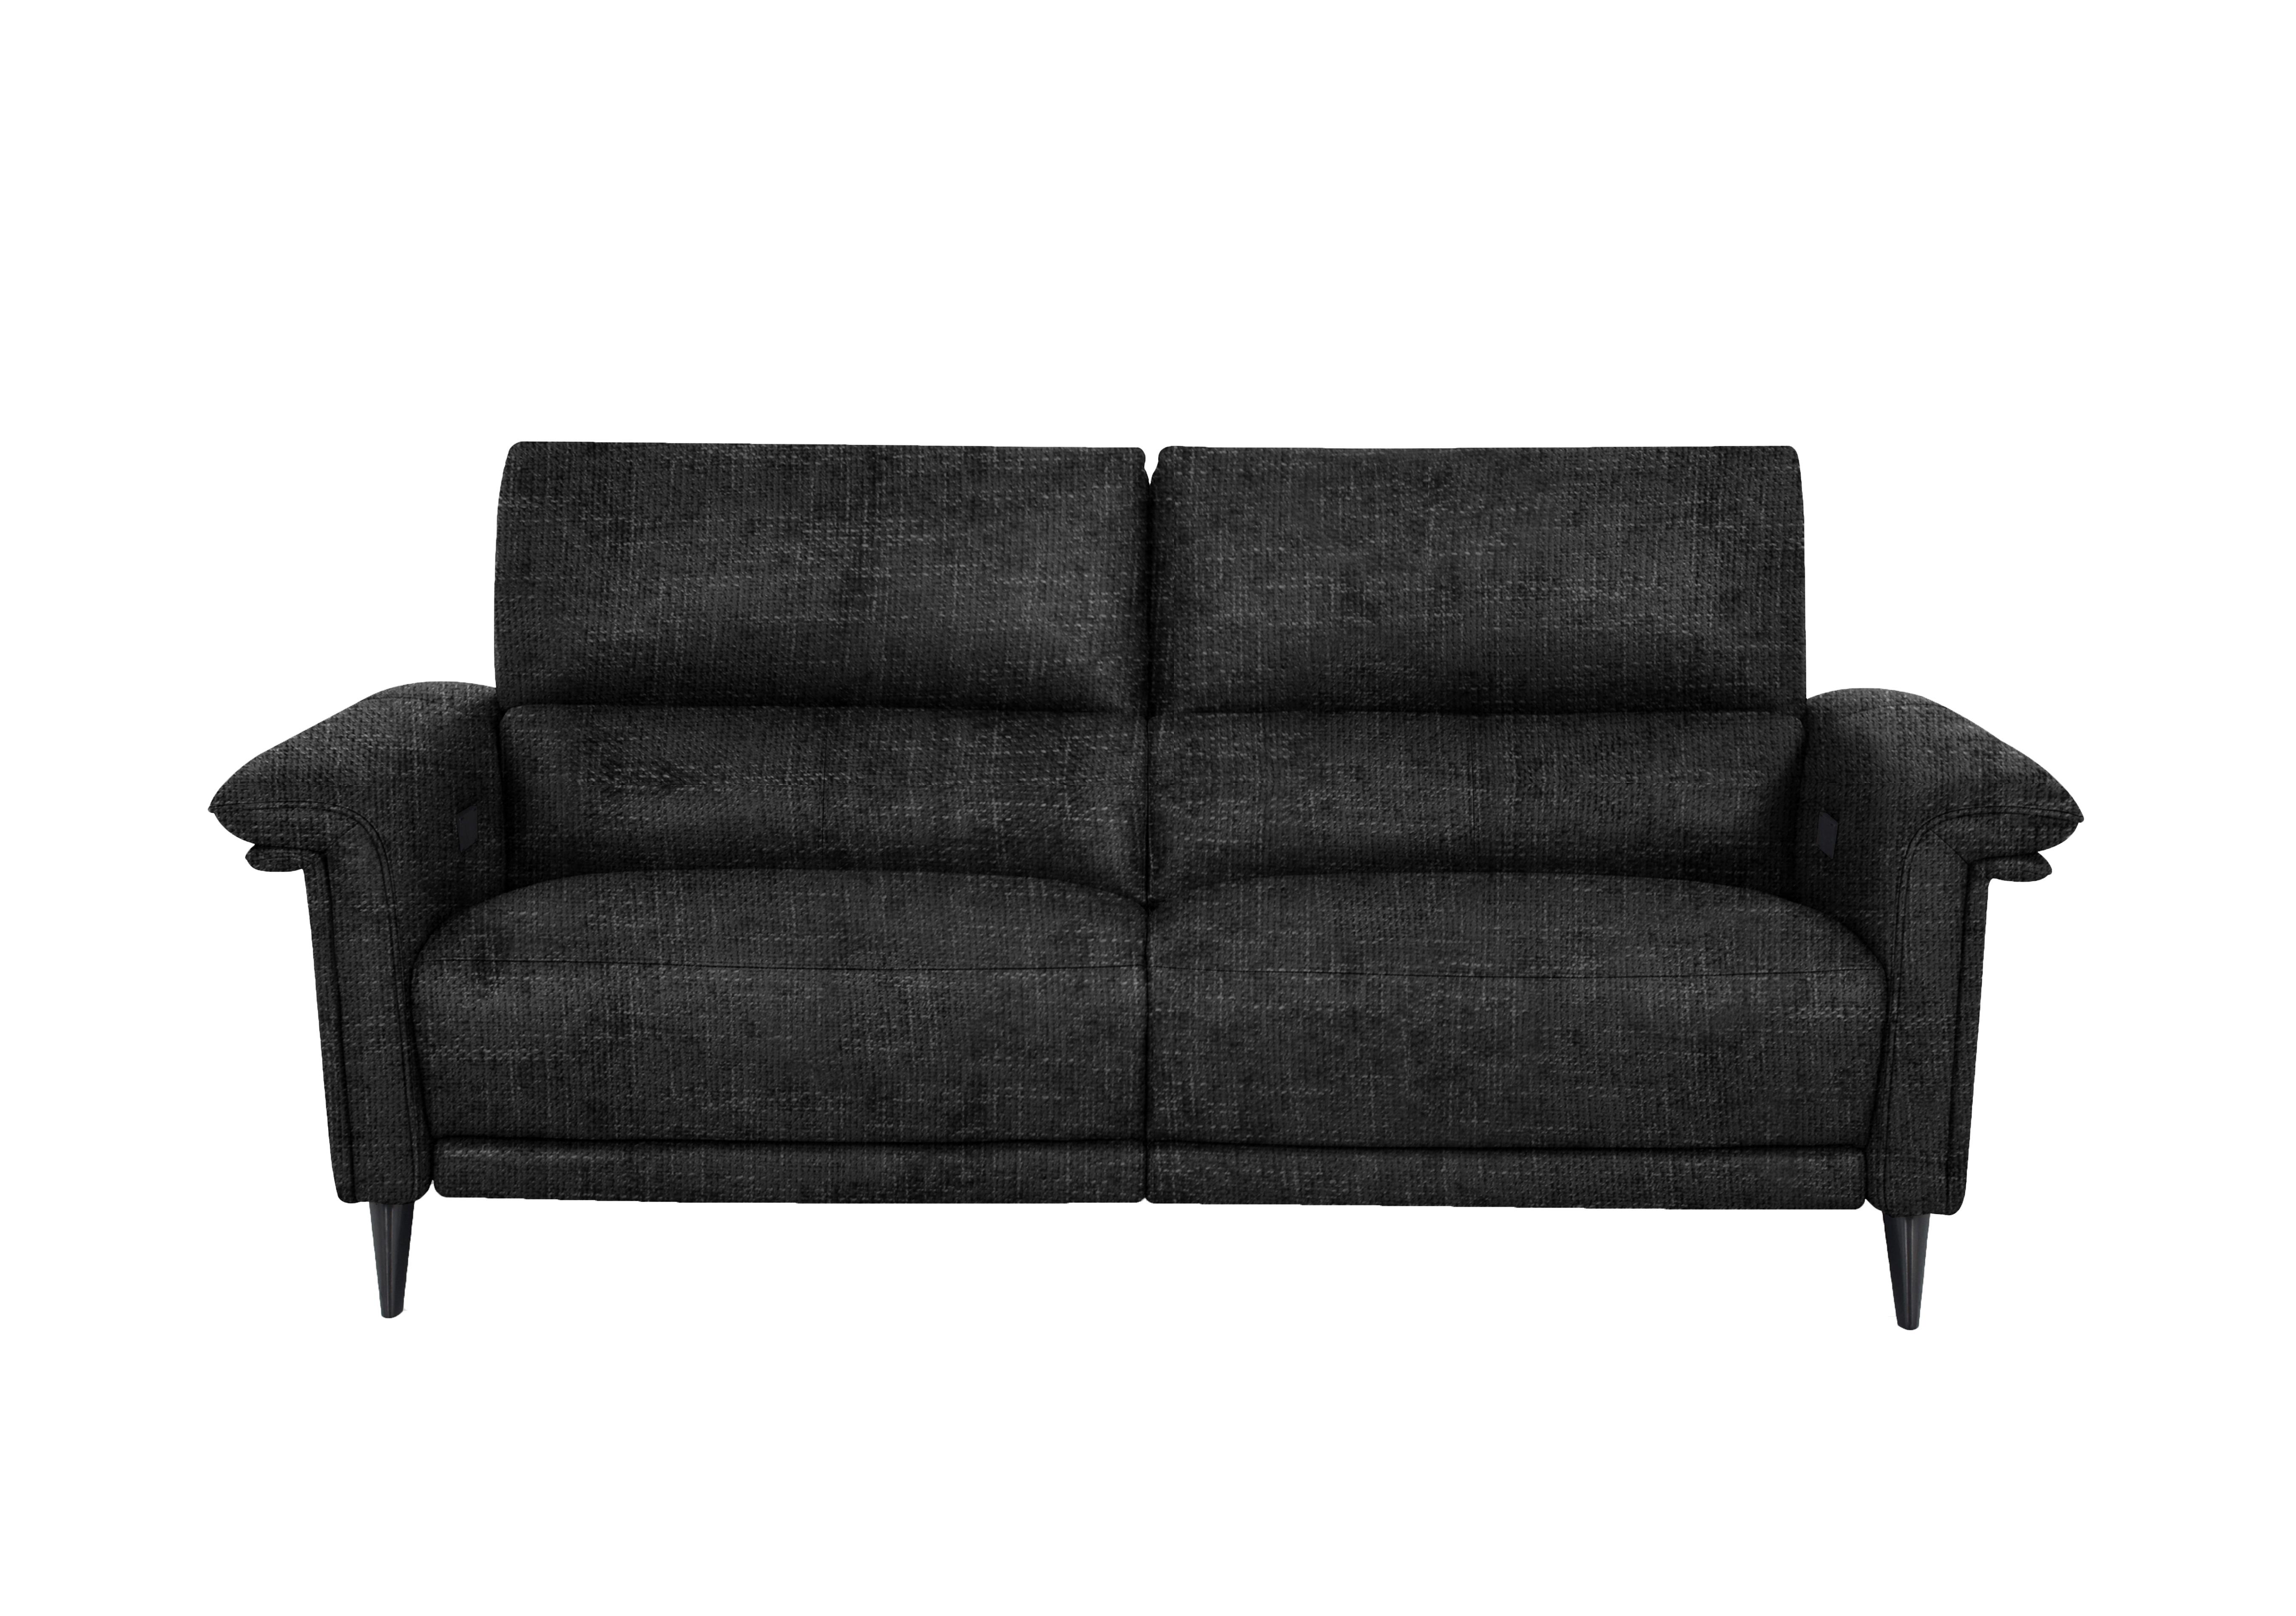 Huxley 3 Seater Fabric Sofa in Fab-Cac-R463 Black Mica on Furniture Village